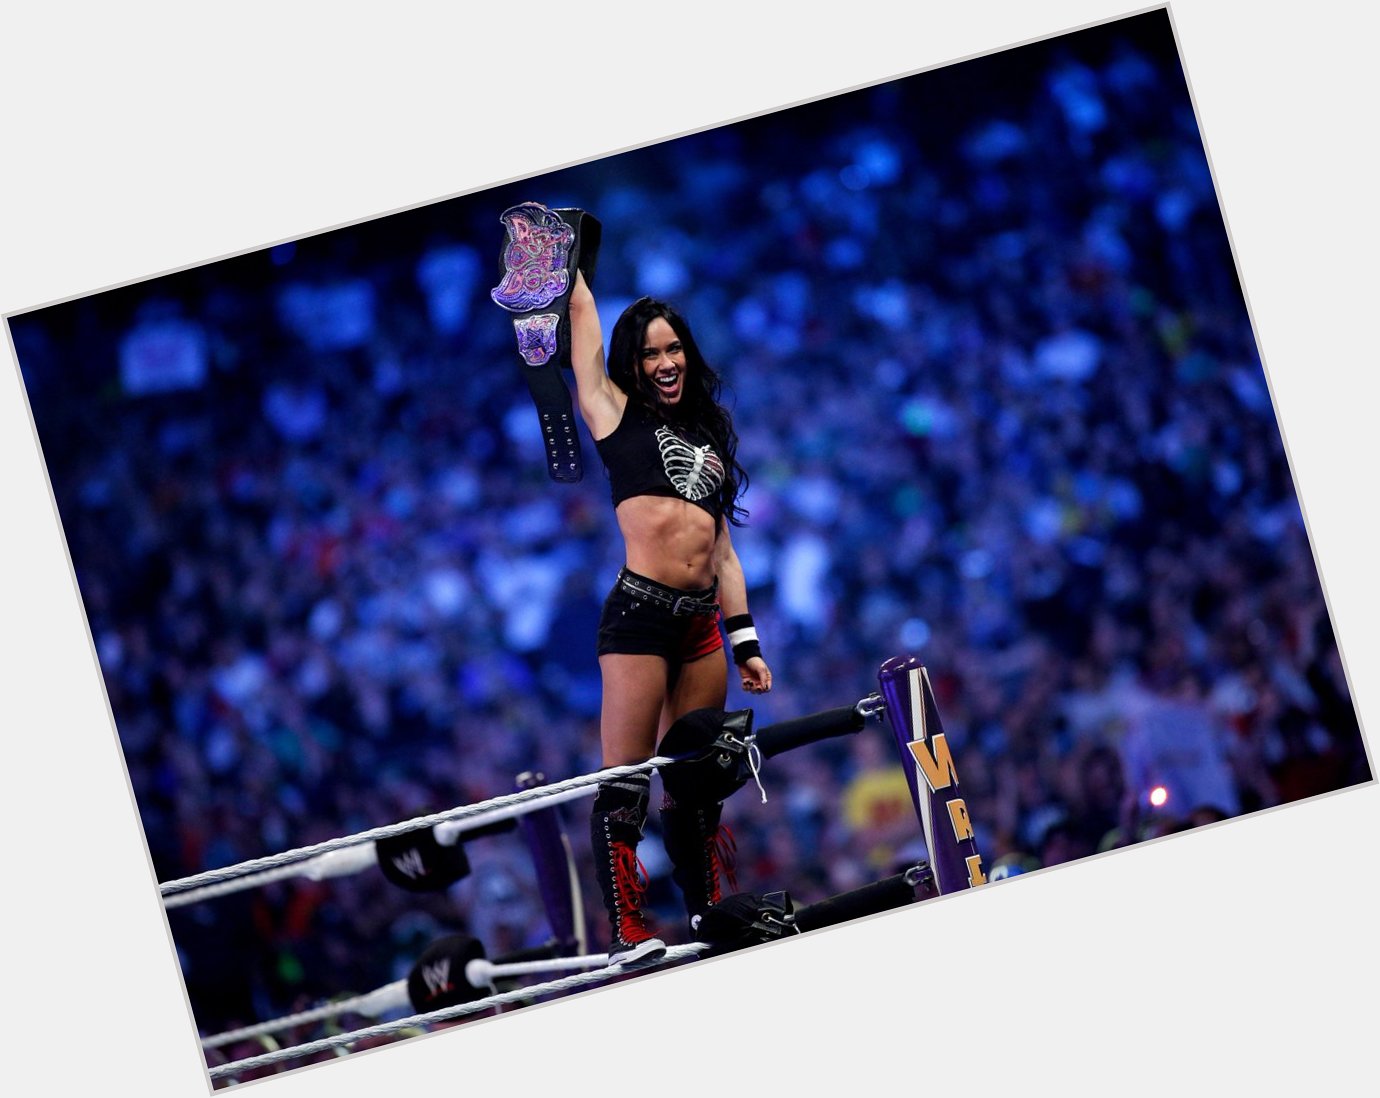  happy birthday to the best diva in the world Aj Lee   